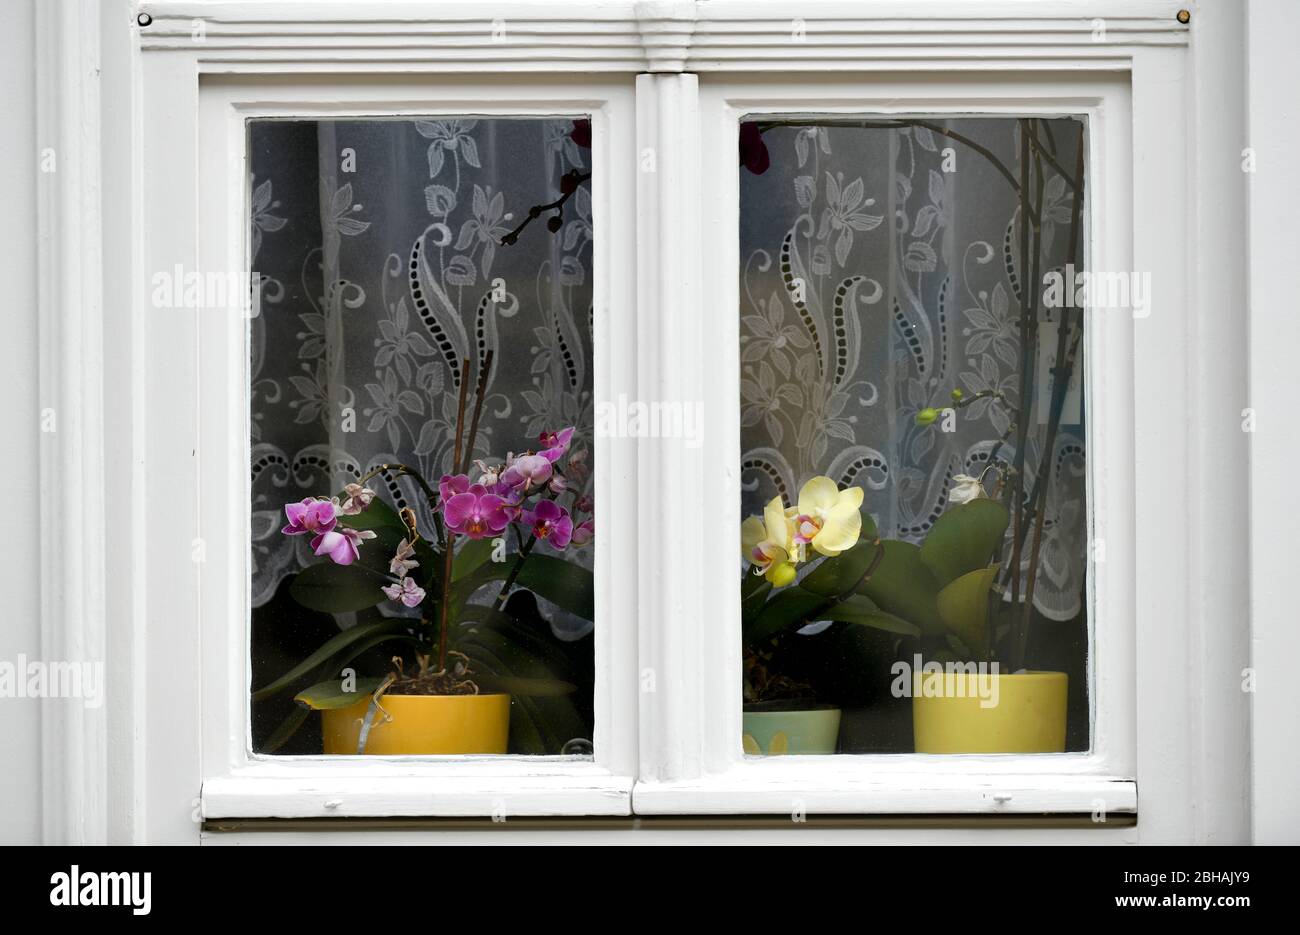 Orchids at the window, district Spandau, Berlin, Germany Stock Photo